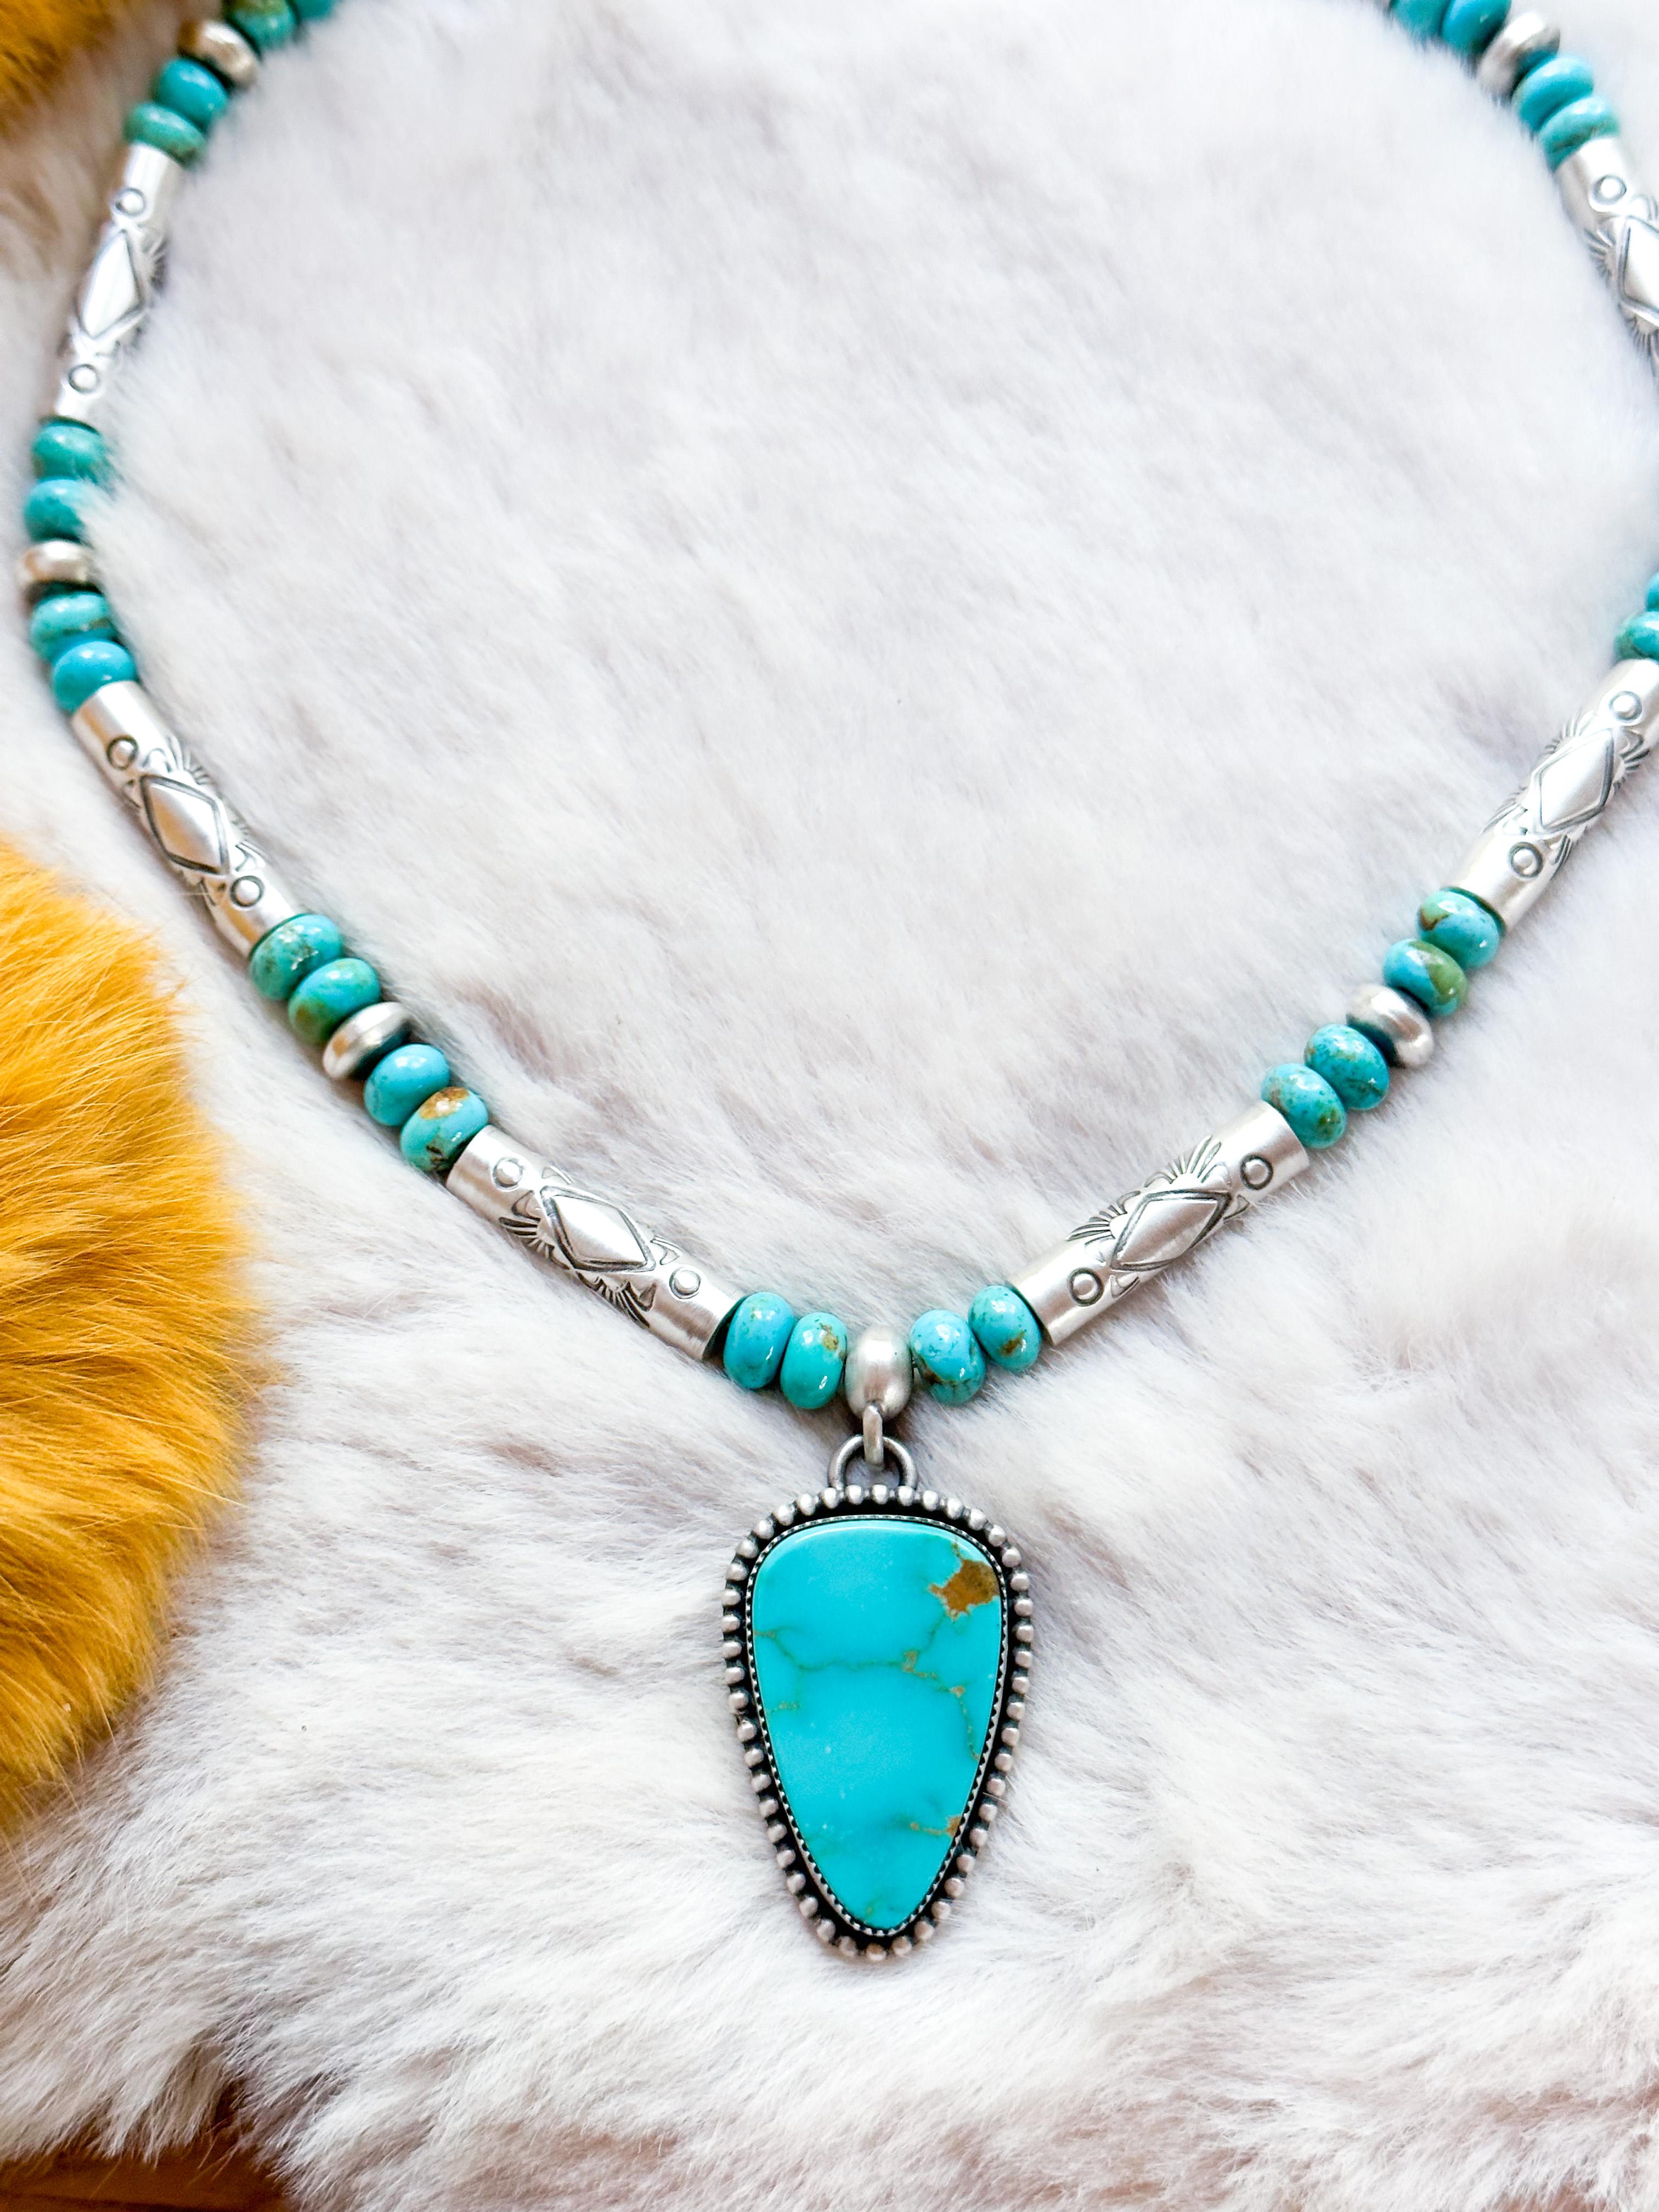 Introducing our captivating hand-stamped turquoise beaded necklace, a striking fusion of vivid blue and green hues, adorned with shimmering silver beads. This exquisite piece is crowned with a mesmerizing triangular pendant, exuding an air of modern